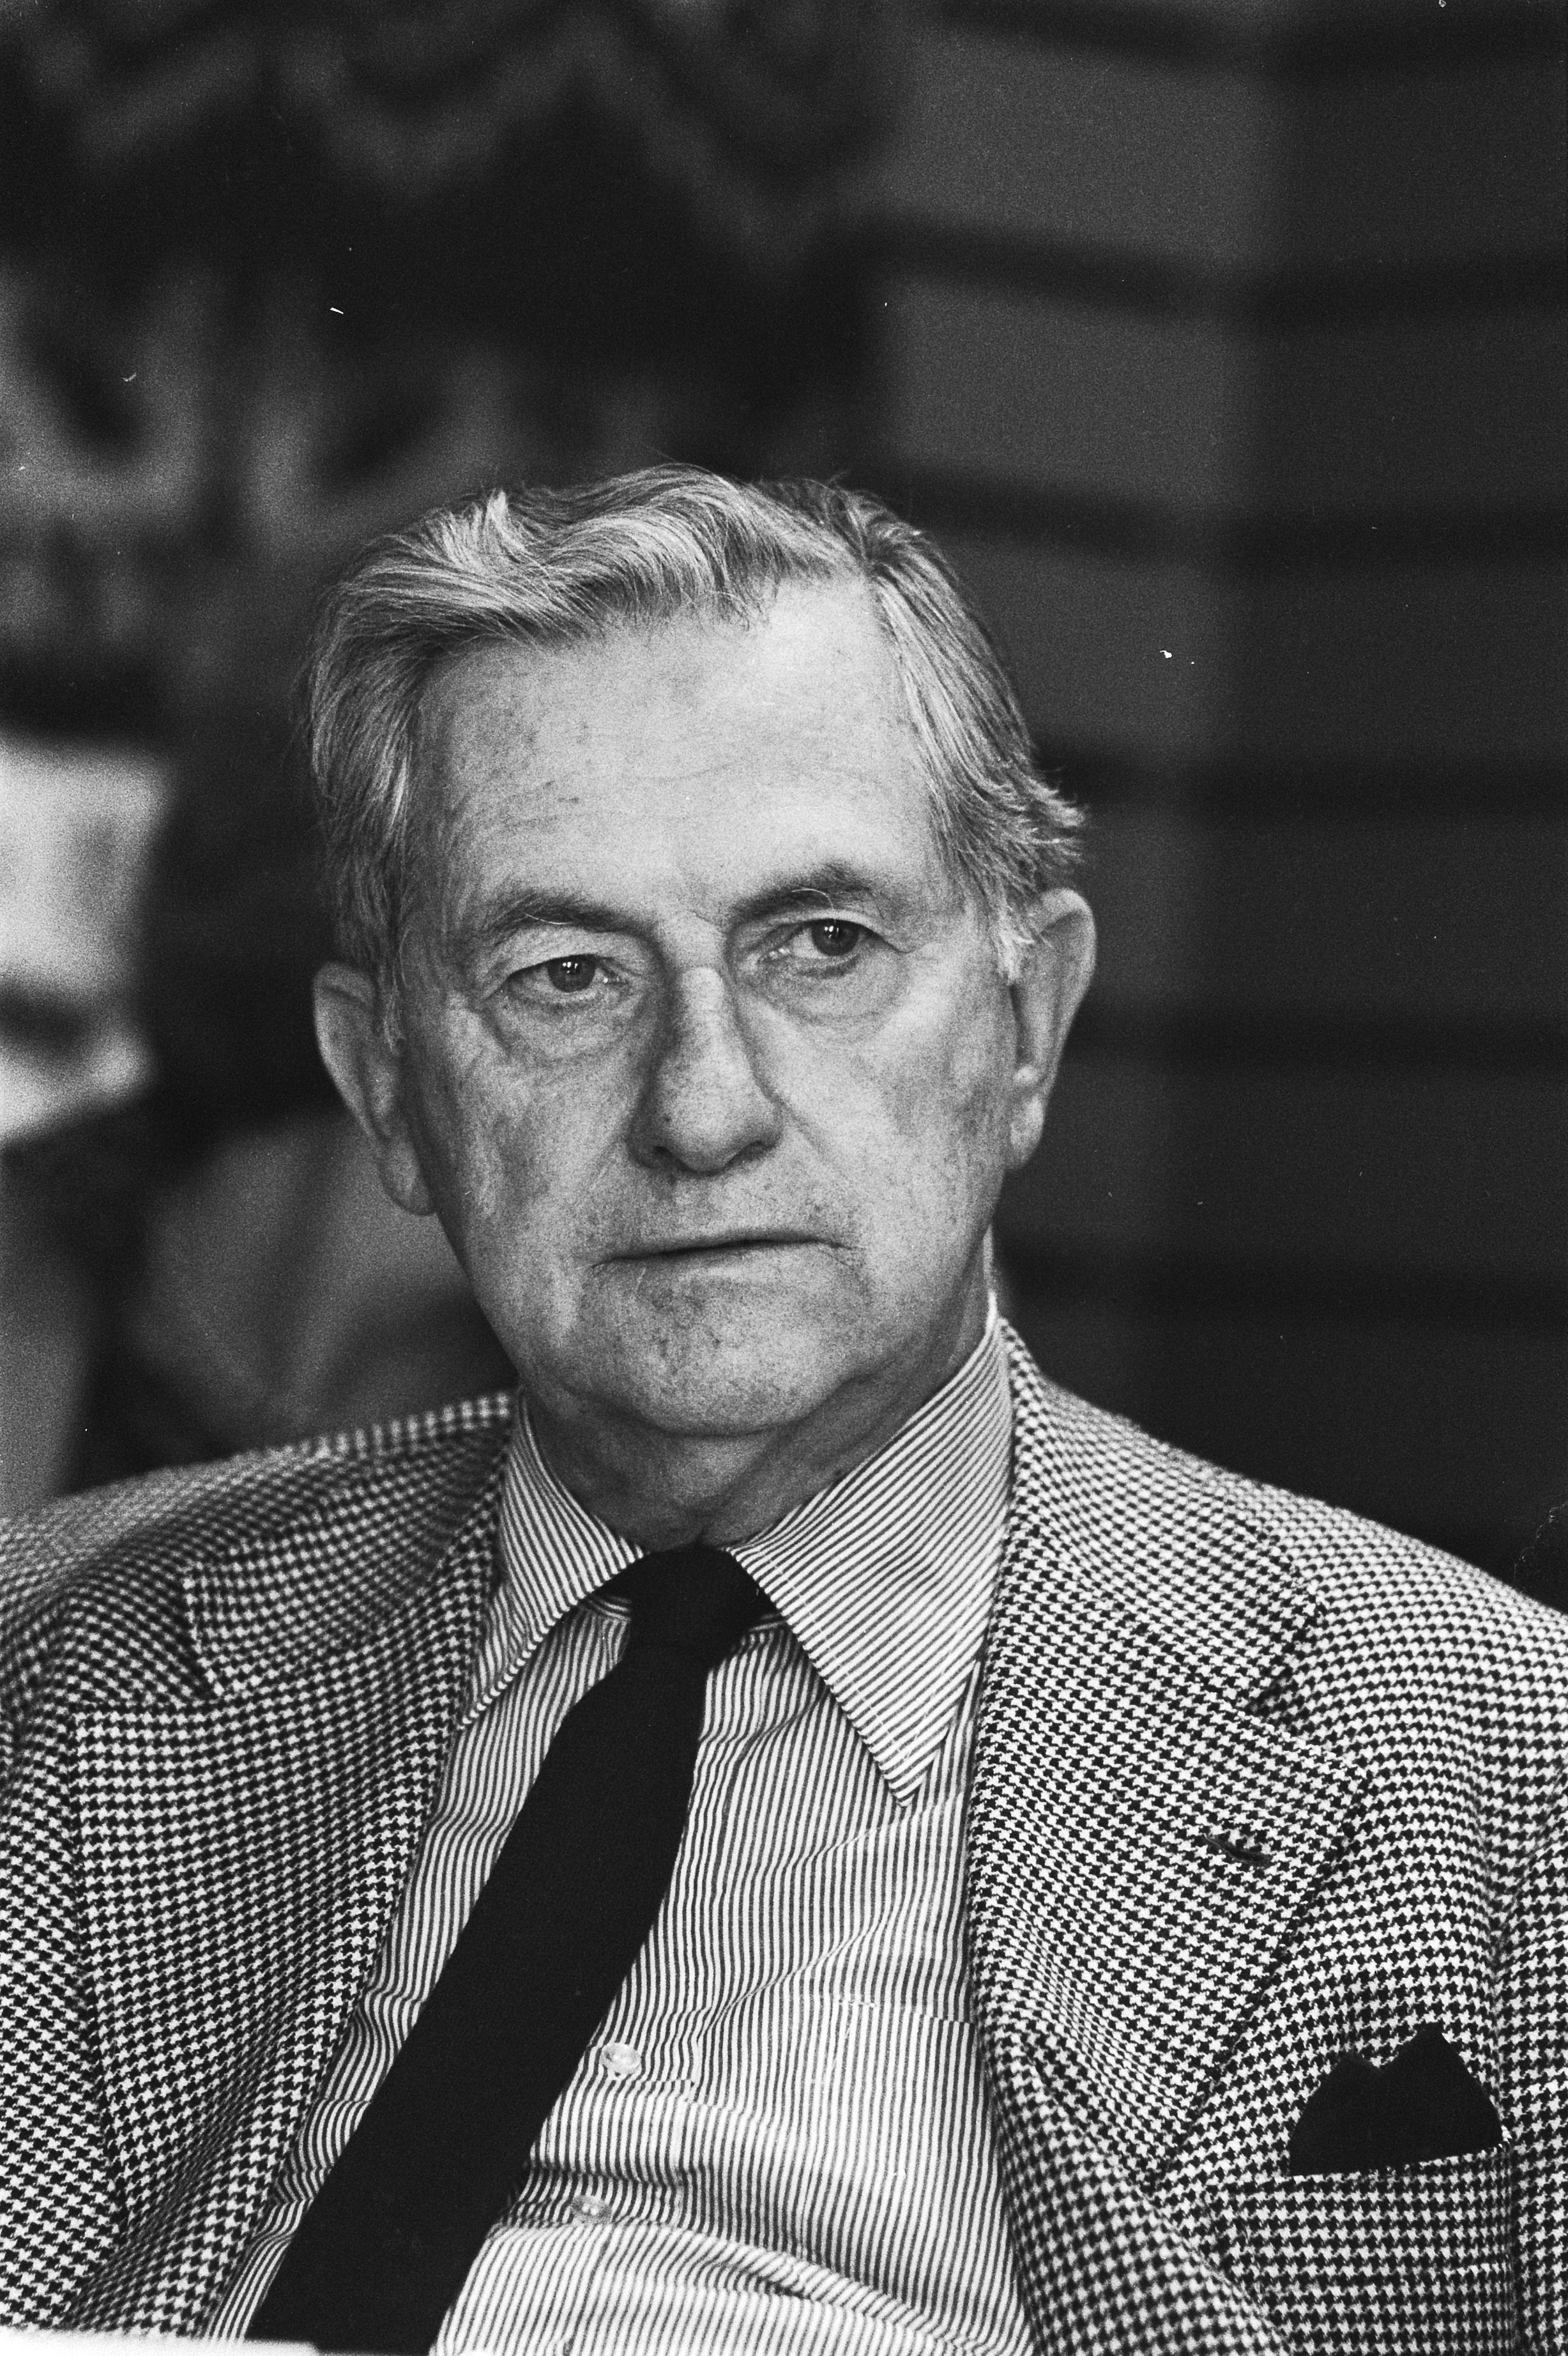 L.G. H. Jaquet in 1985. © Rob Bogaerts / Anefo / NA